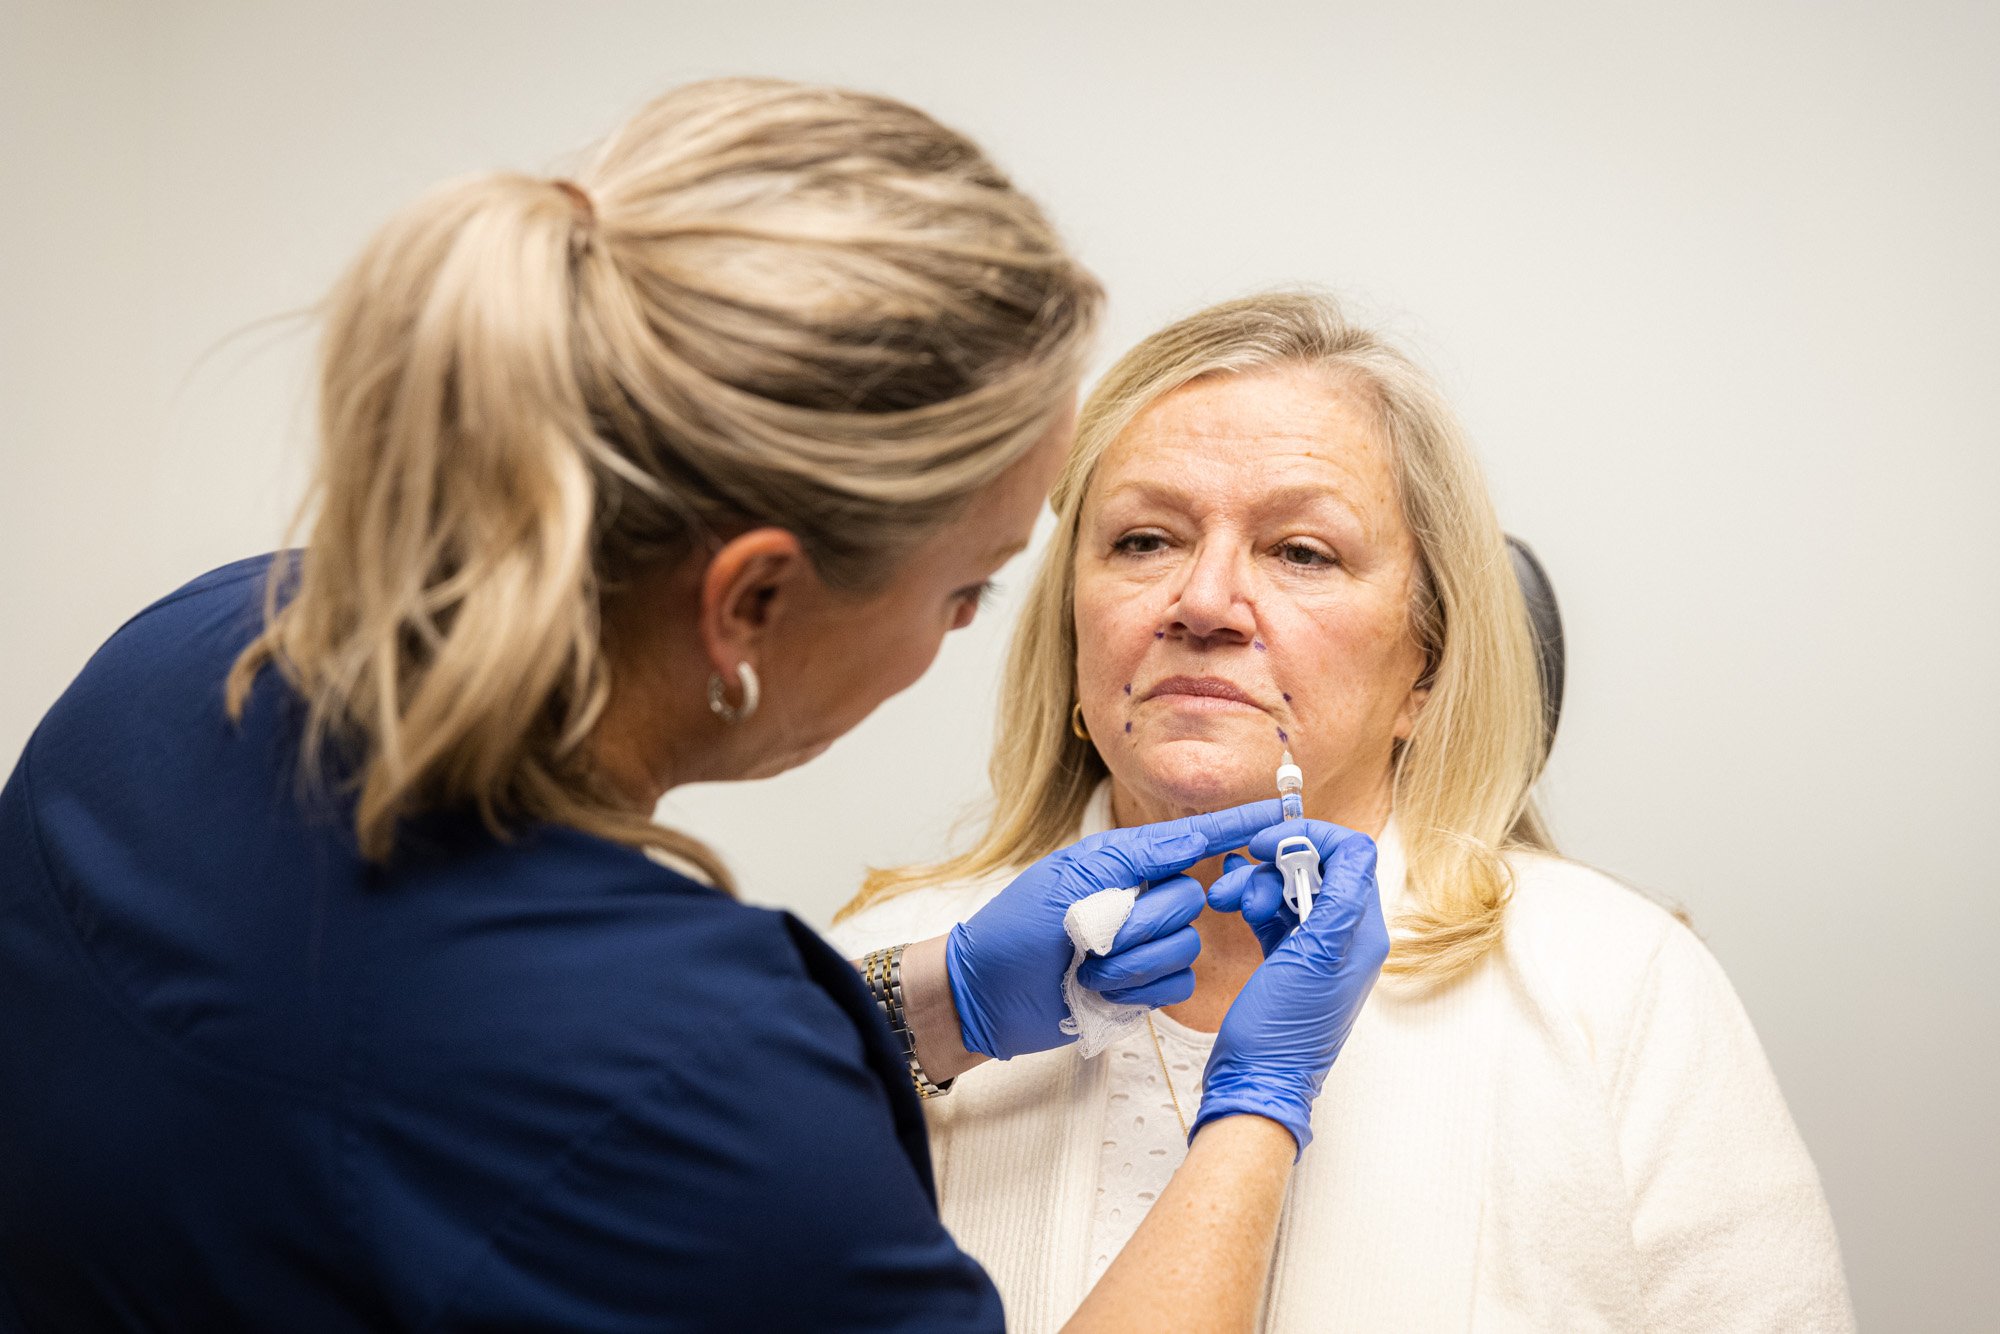 A specialist injects dermal fillers into pre-planned areas of a patient's face.